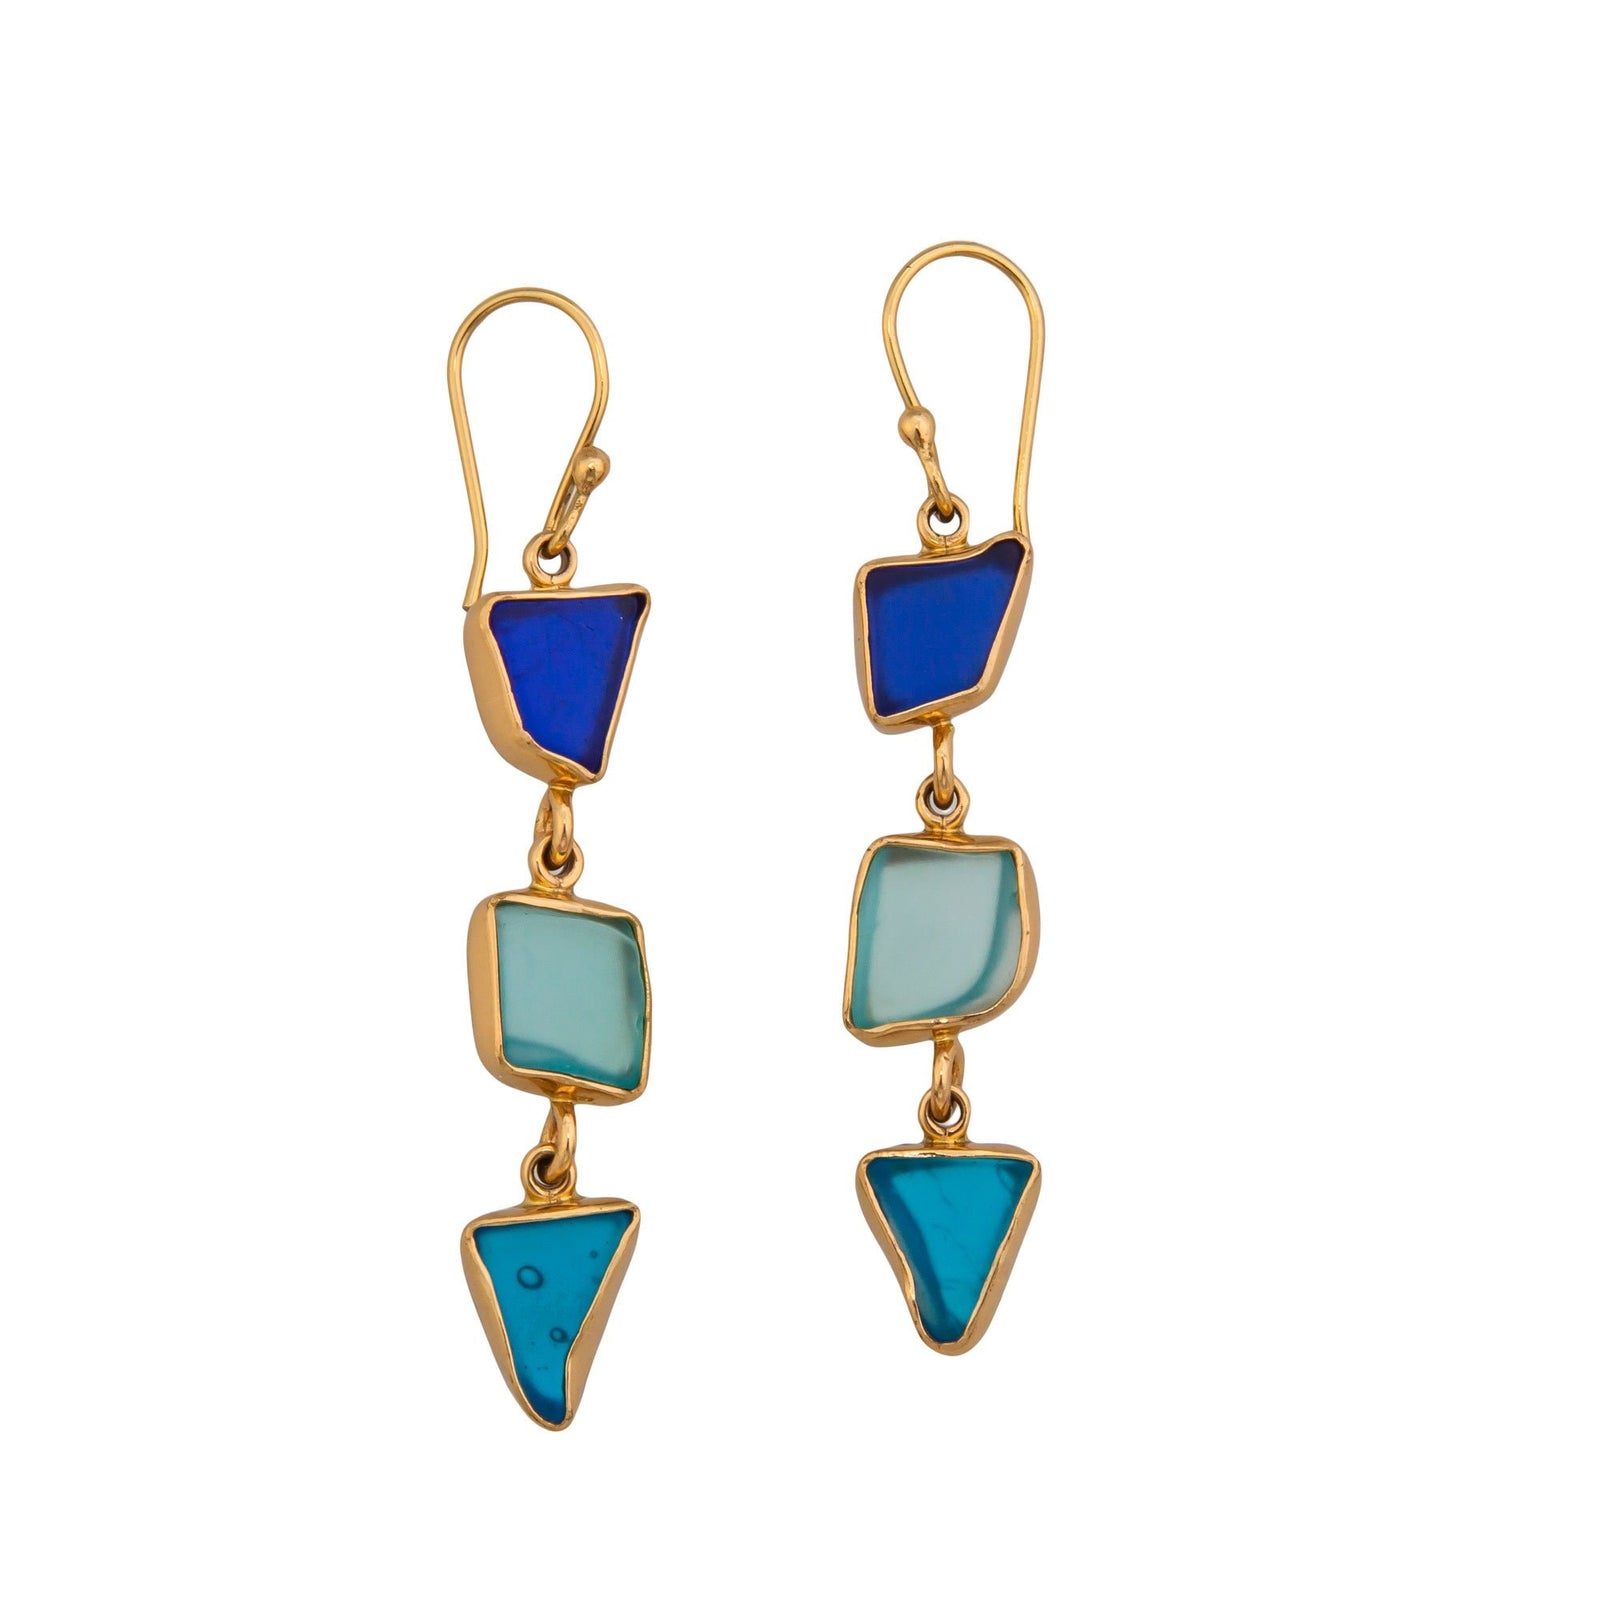 Alchemia Recycled Multi-Color Glass Earrings | Charles Albert Jewelry